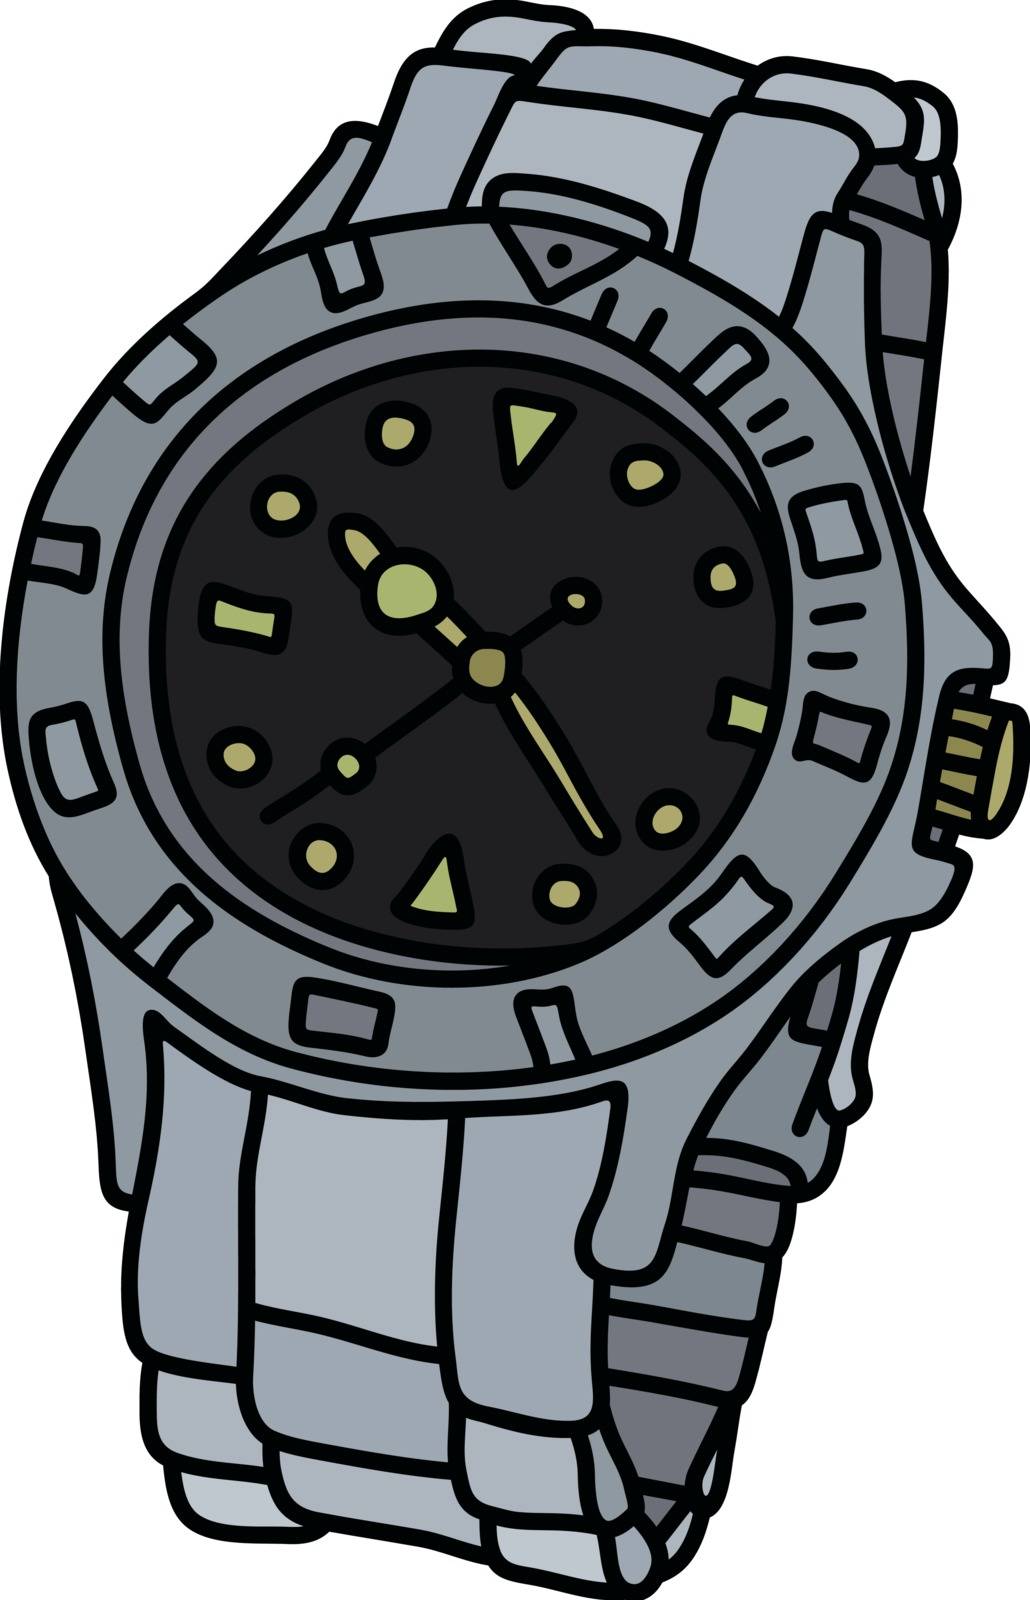 The vectorized hand drawing of a sports waterproof wrist watch